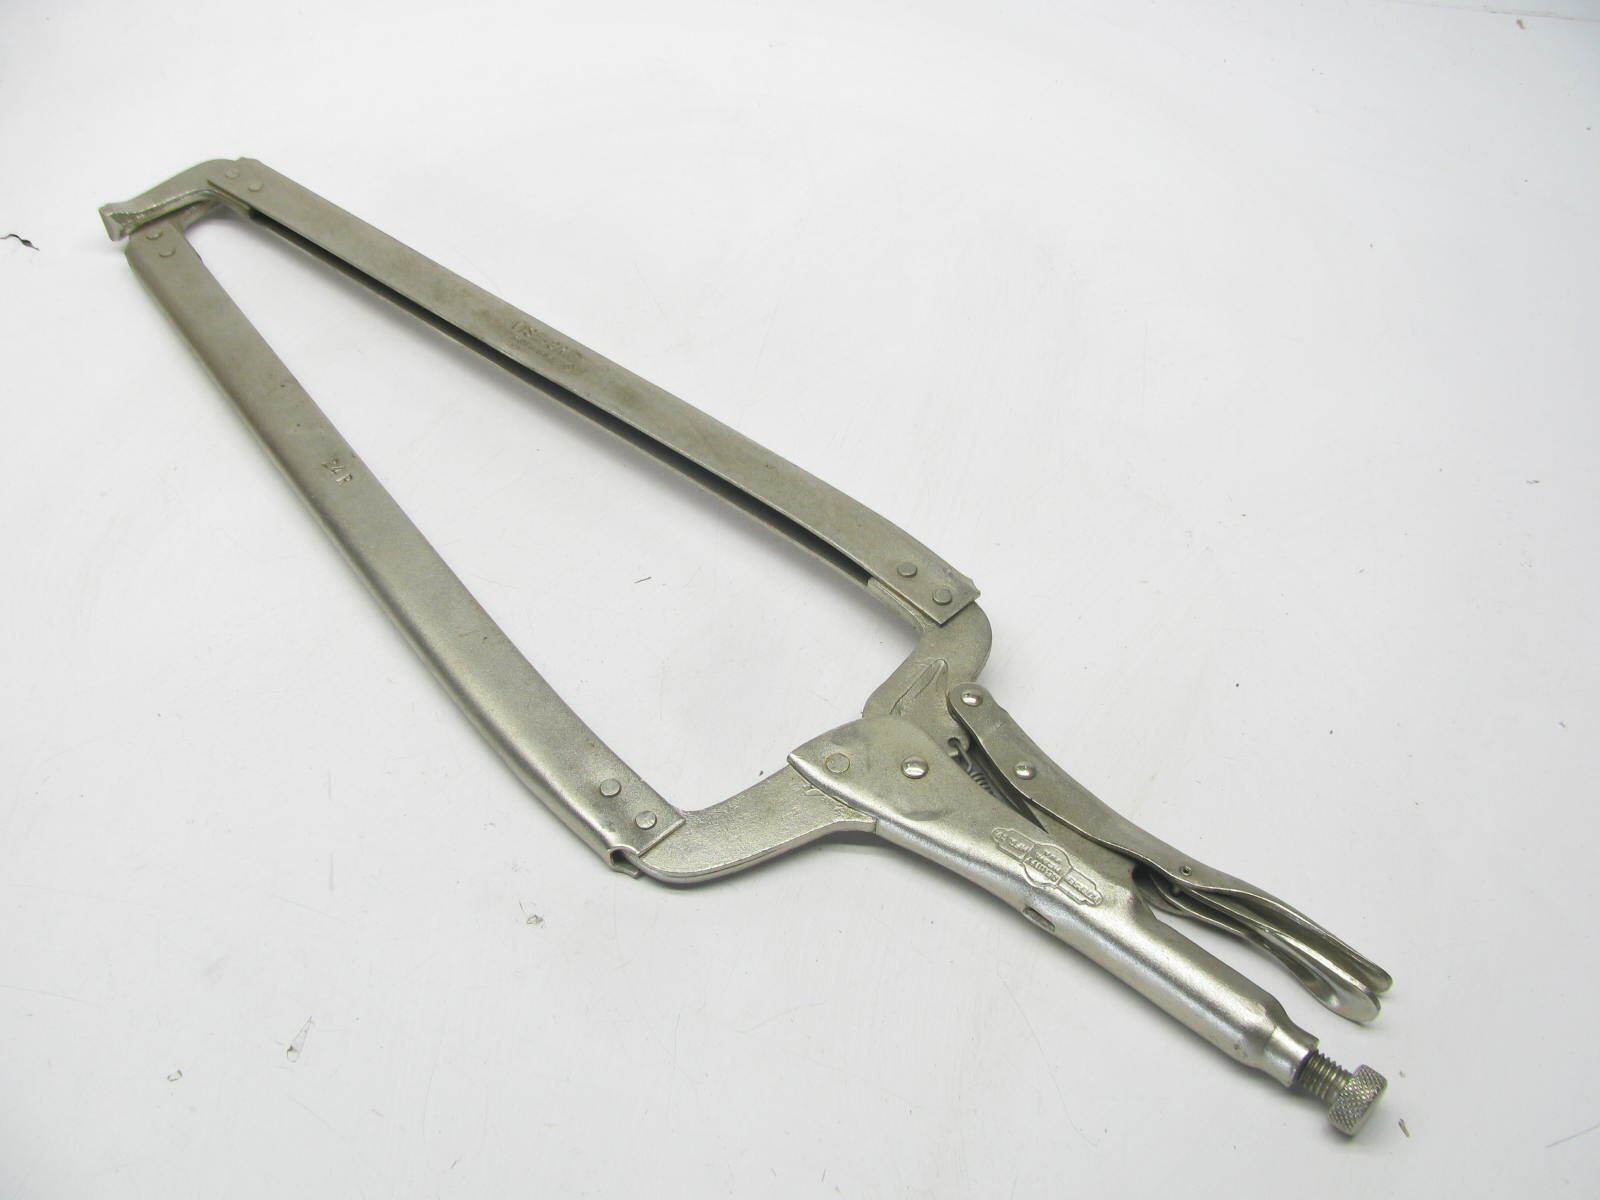 NOS - Vise-grip 24R 24" Locking C-Clamp Pliers 10" Jaw Capacity - MADE IN USA